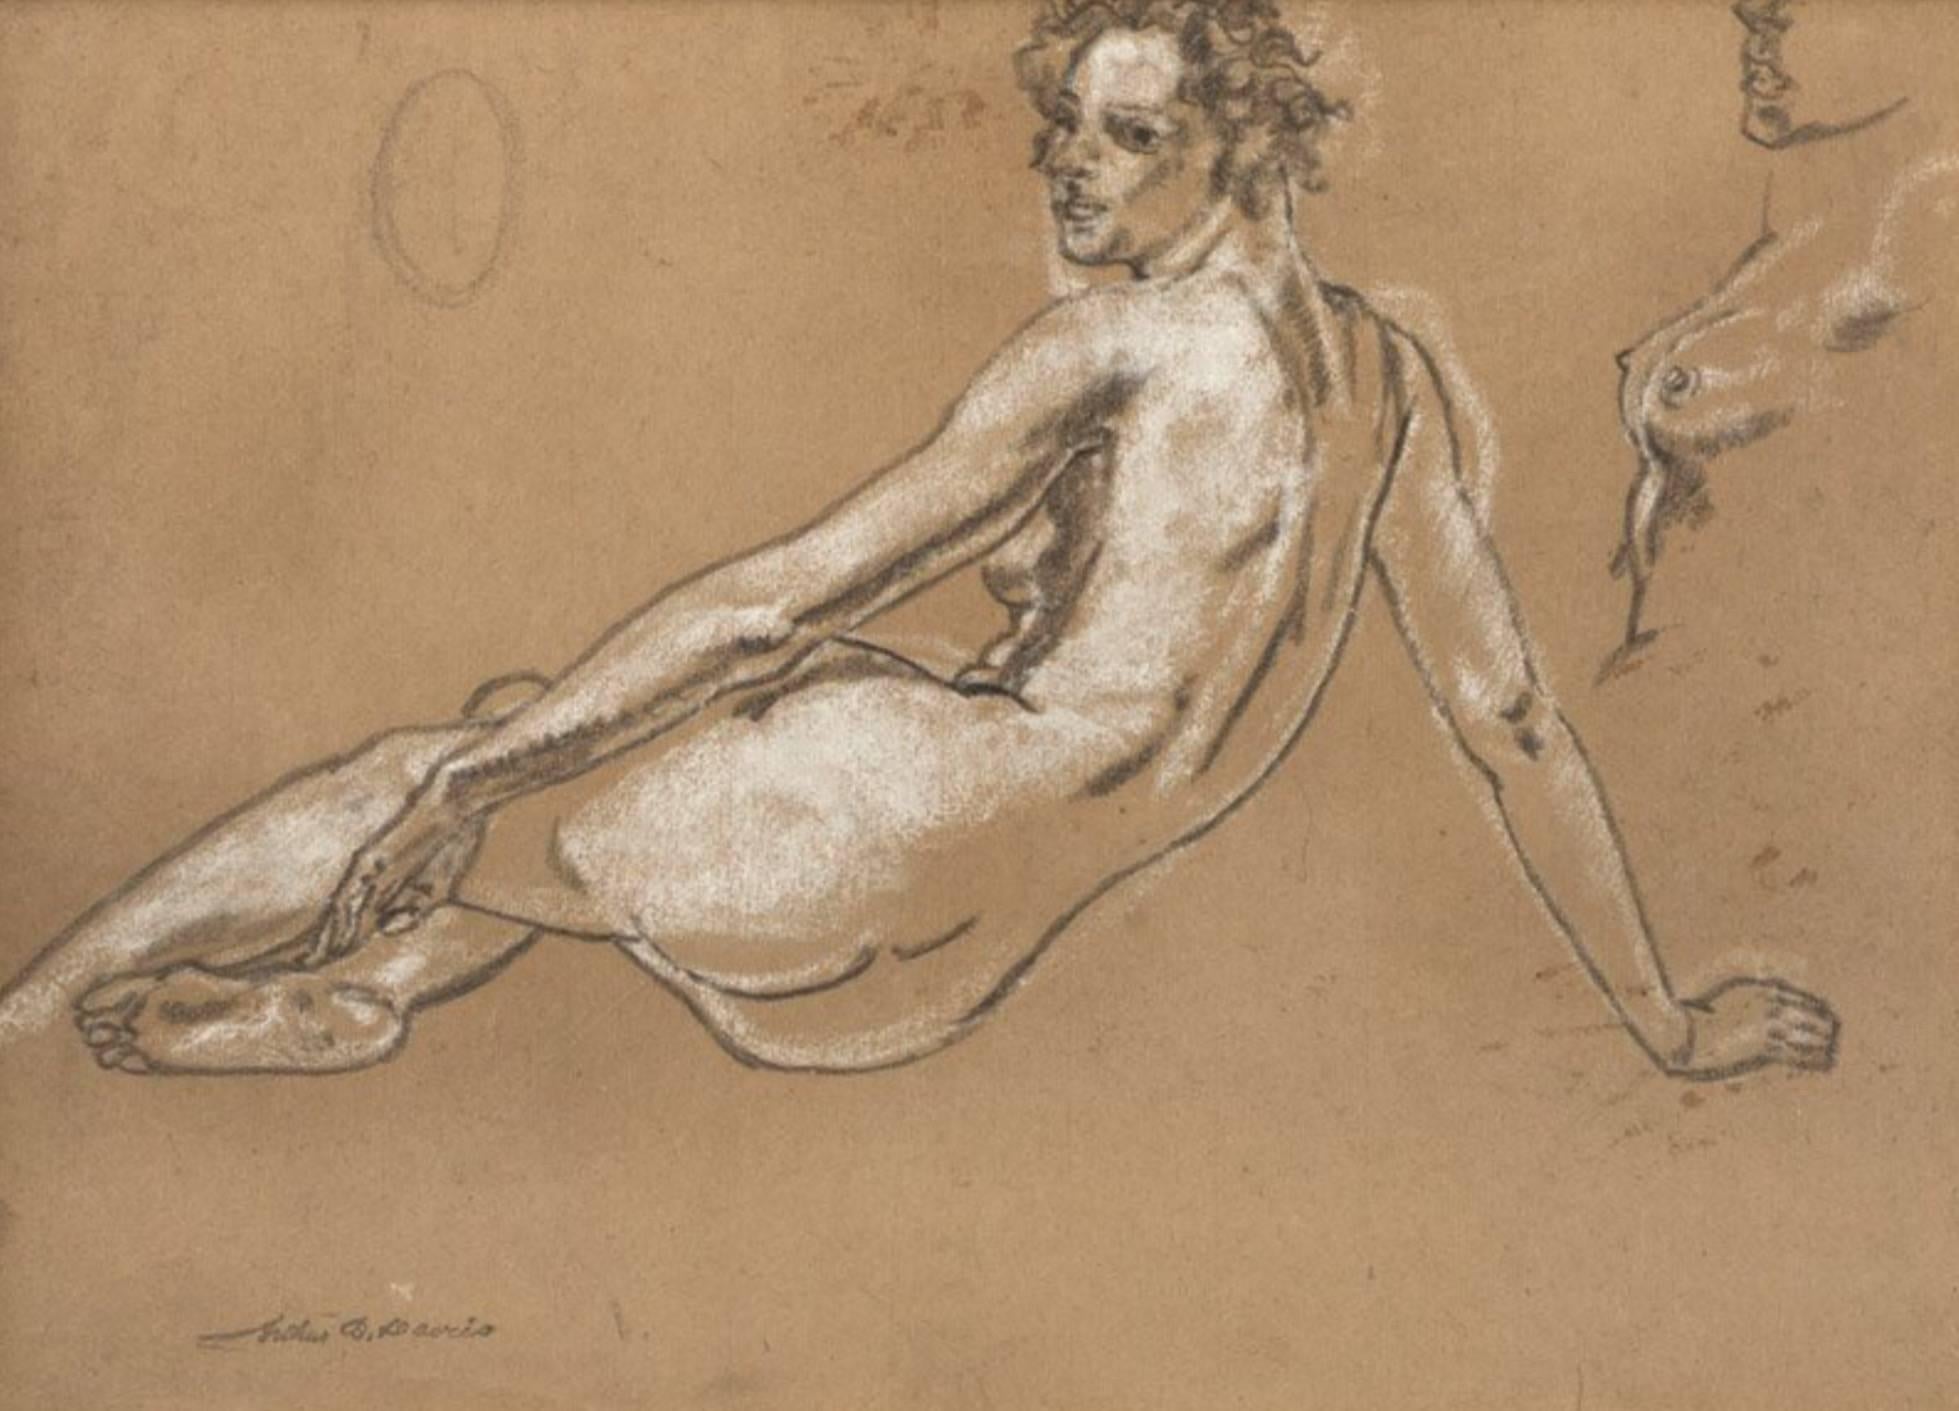 
Arthur Bowen Davies (1862-1928 New York, NY).

Study of a reclining female nude with detail side drawing, pastel, chalk and charcoal. Estate stamped signature lower left: Arthur B. Davies, charcoal and crayon on board under glass. Art Deco